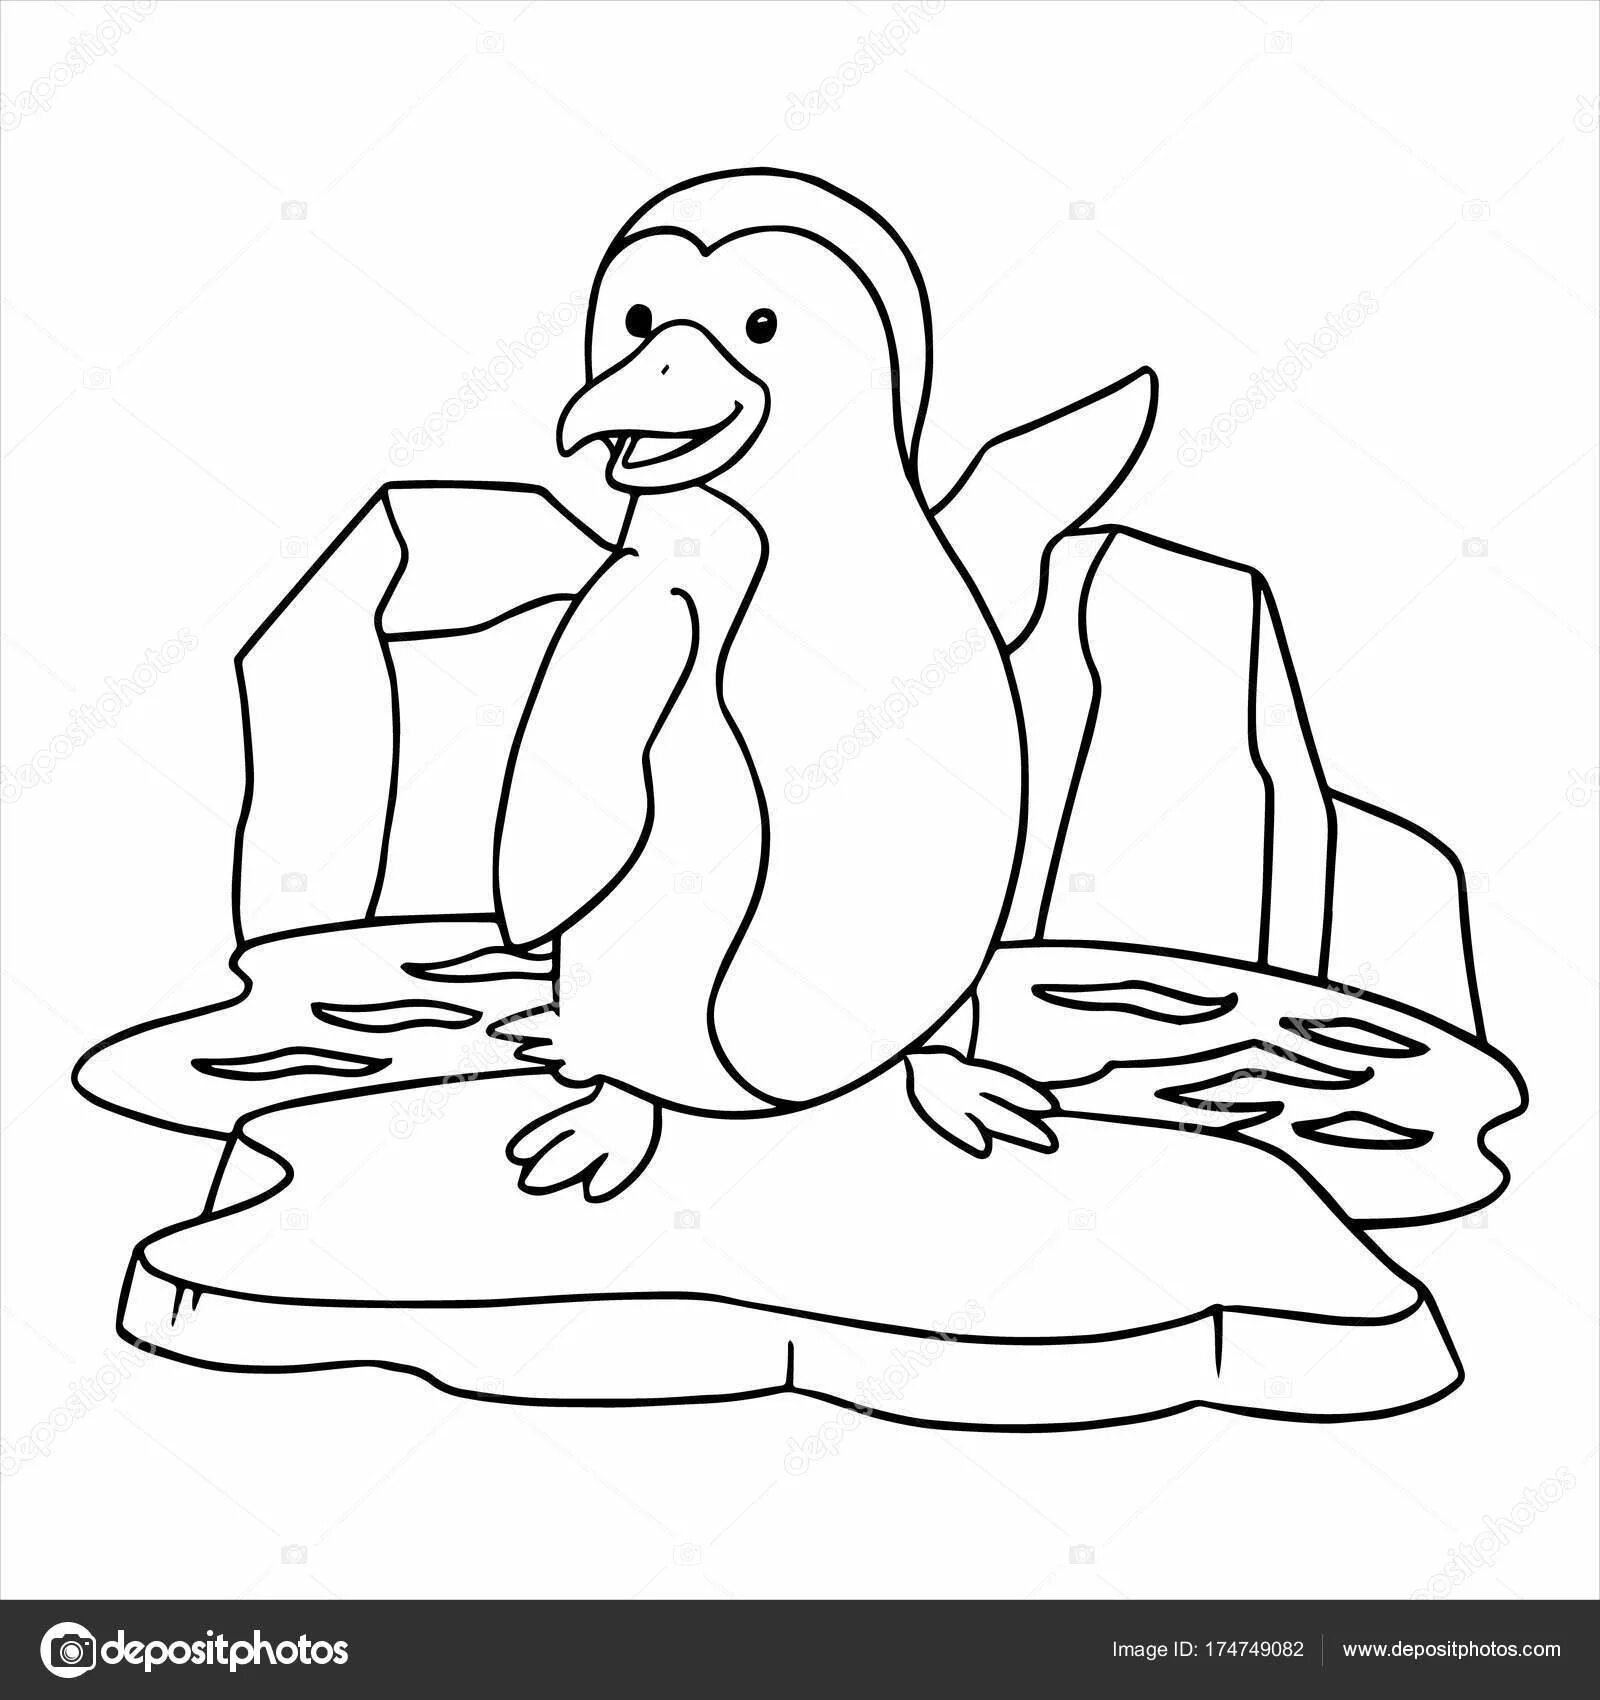 Coloring book exotic penguin on an ice floe for children